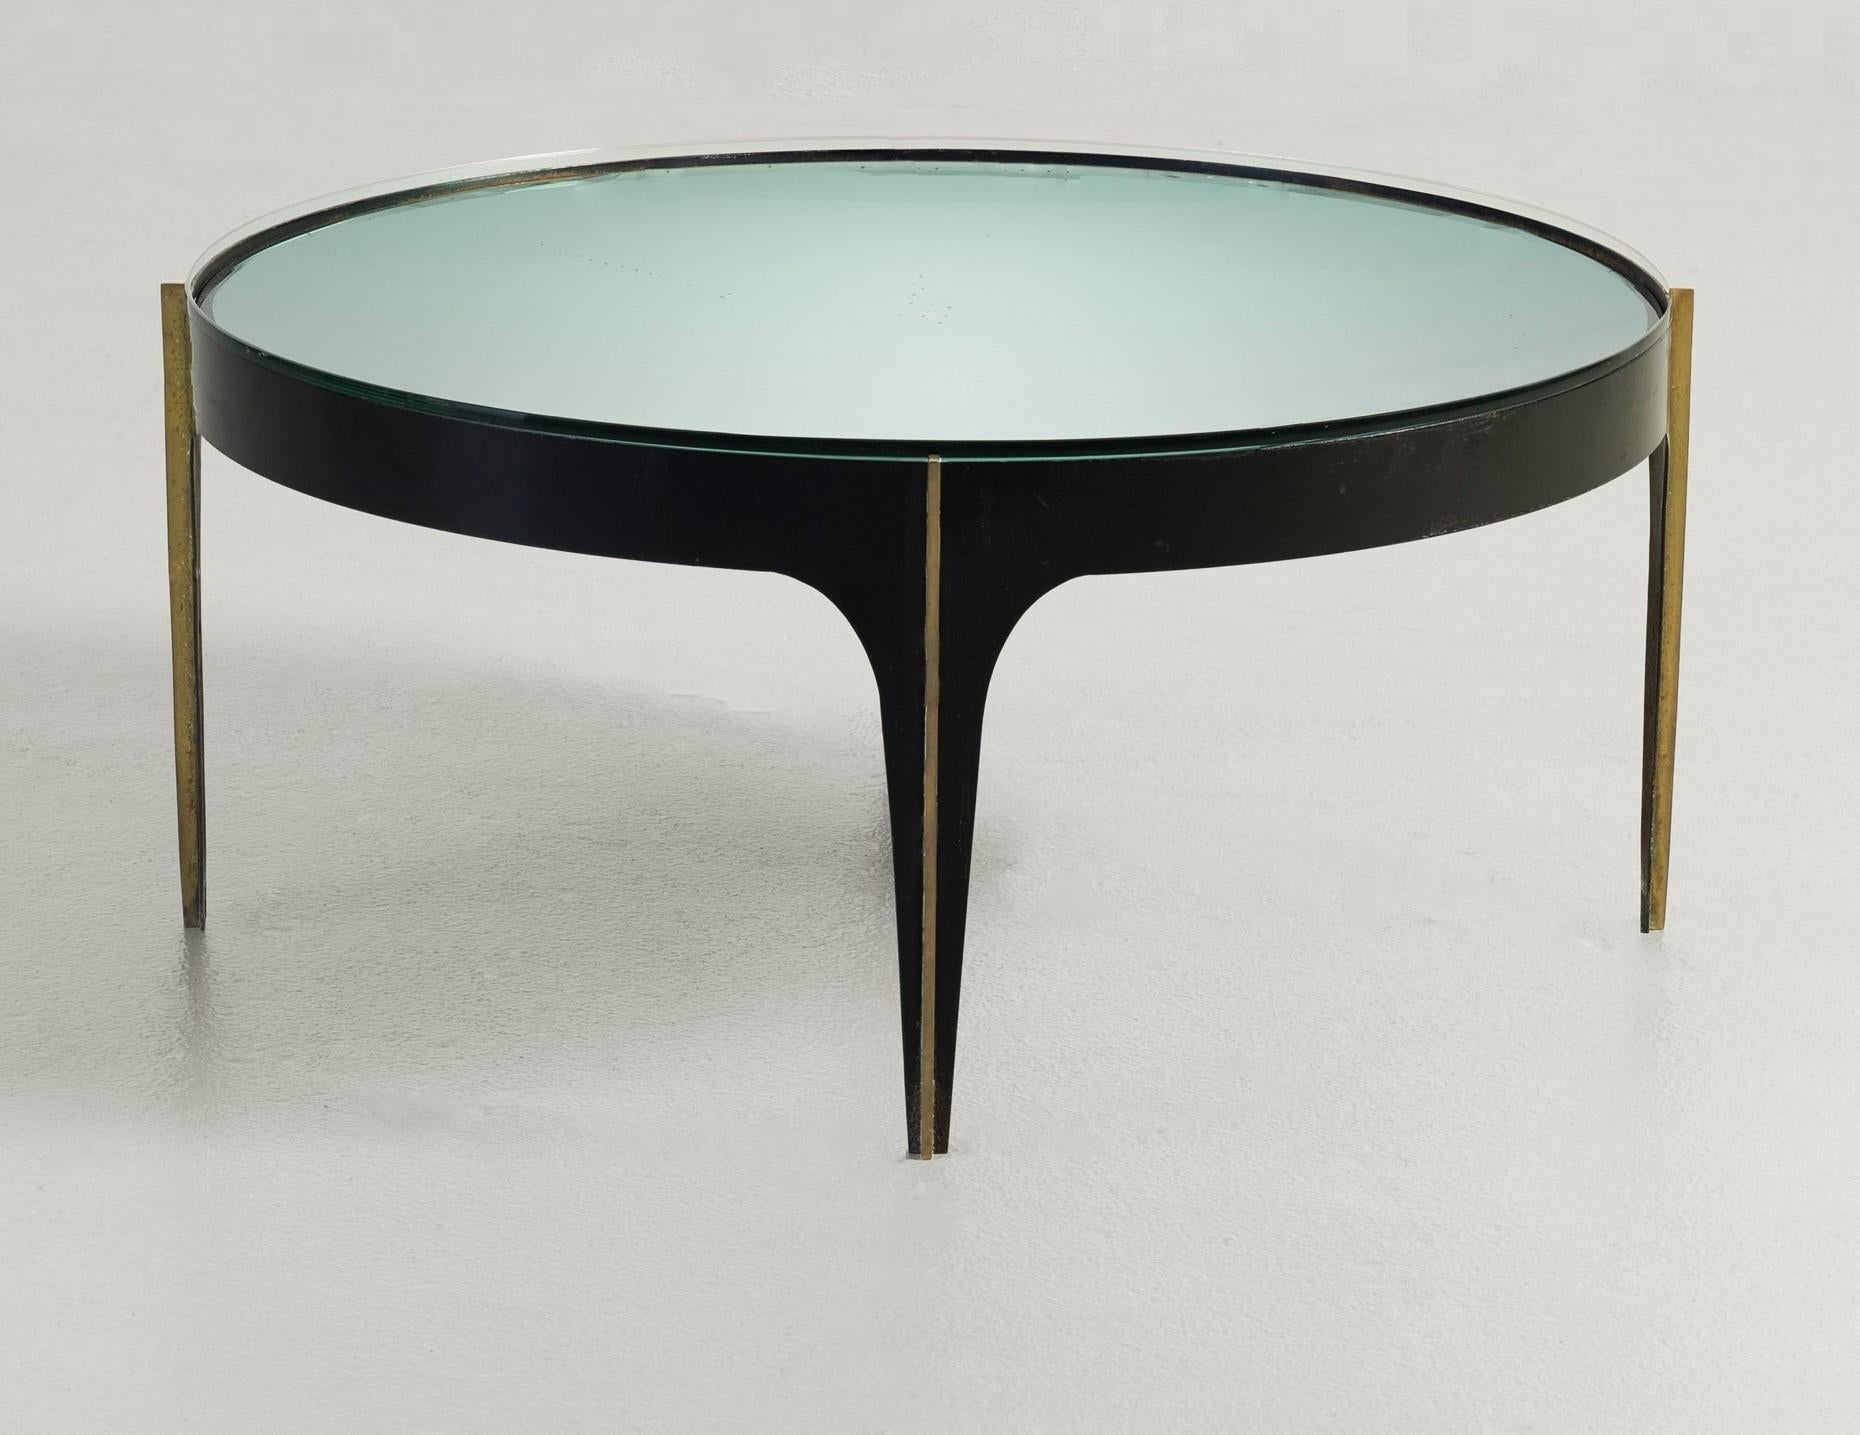 Coffee table manufactured in Italy by Fontana Art, Model 1774, designed by Max Ingrand, circa 1958. The base is from curved blackened iron with solid brass profiles attached to the legs. The top of the table is composed of two separate parts: 1